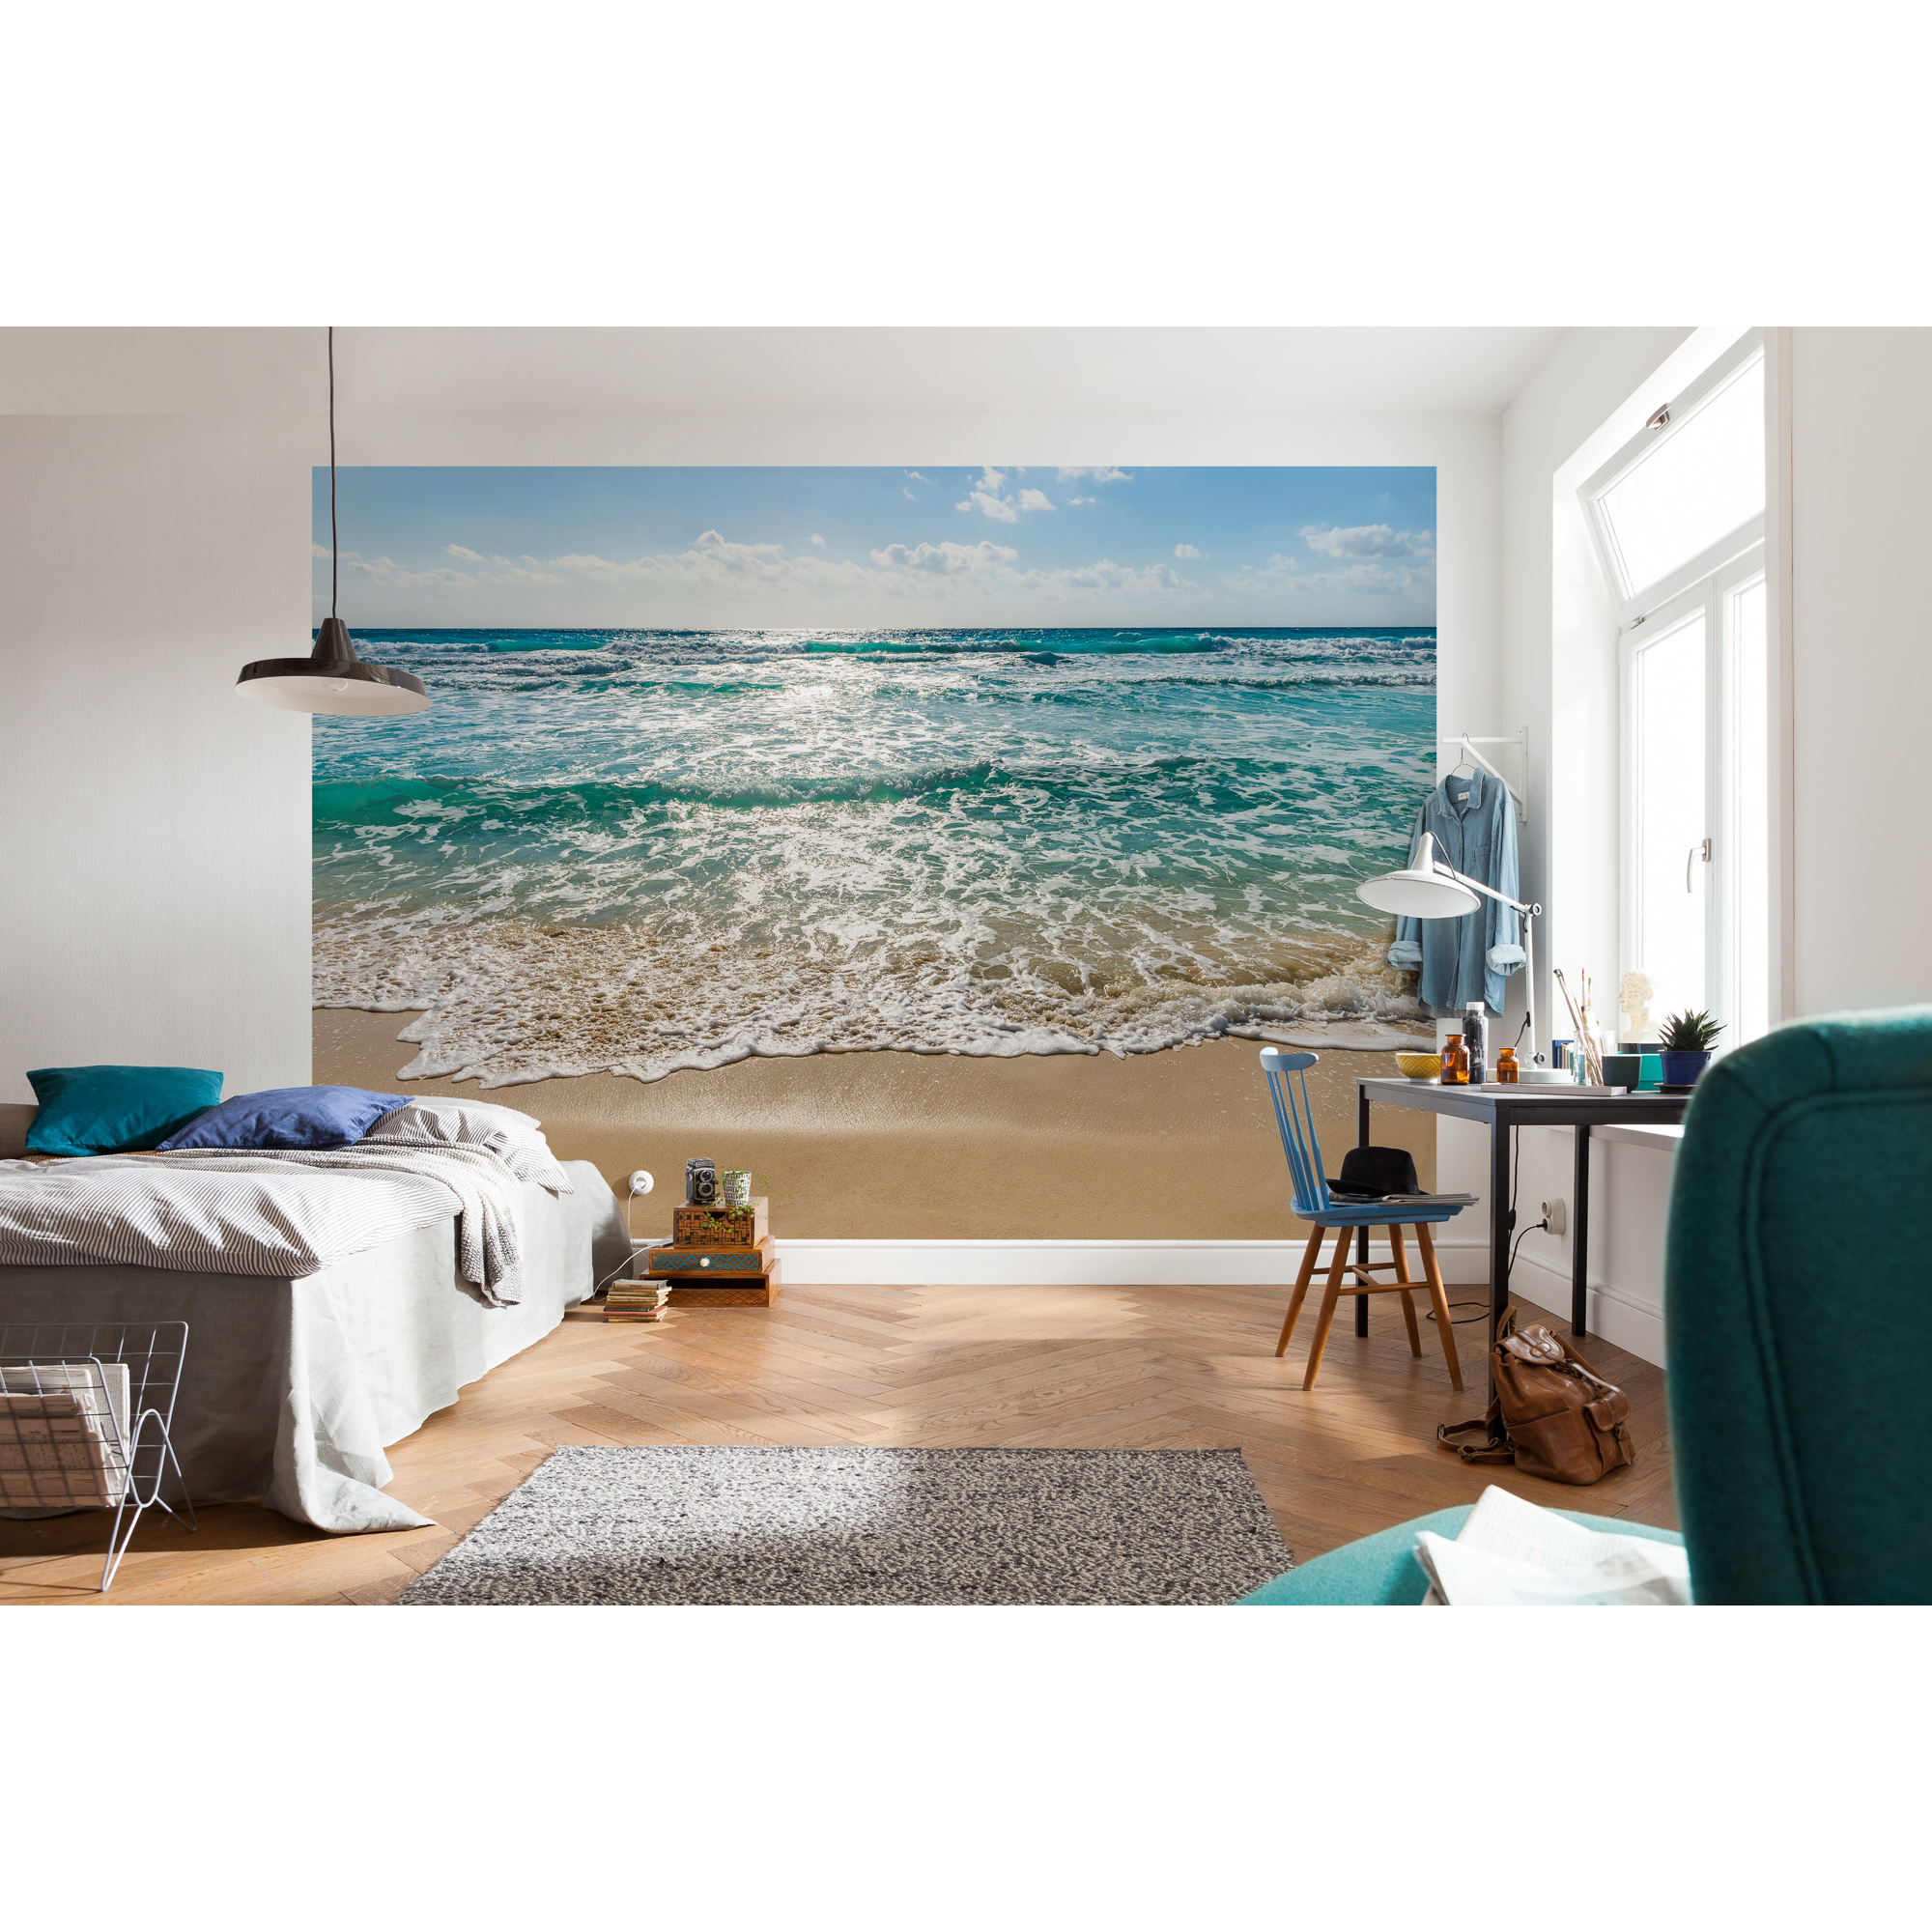 Fototapete 'Seaside' 368 x 254 cm + product picture